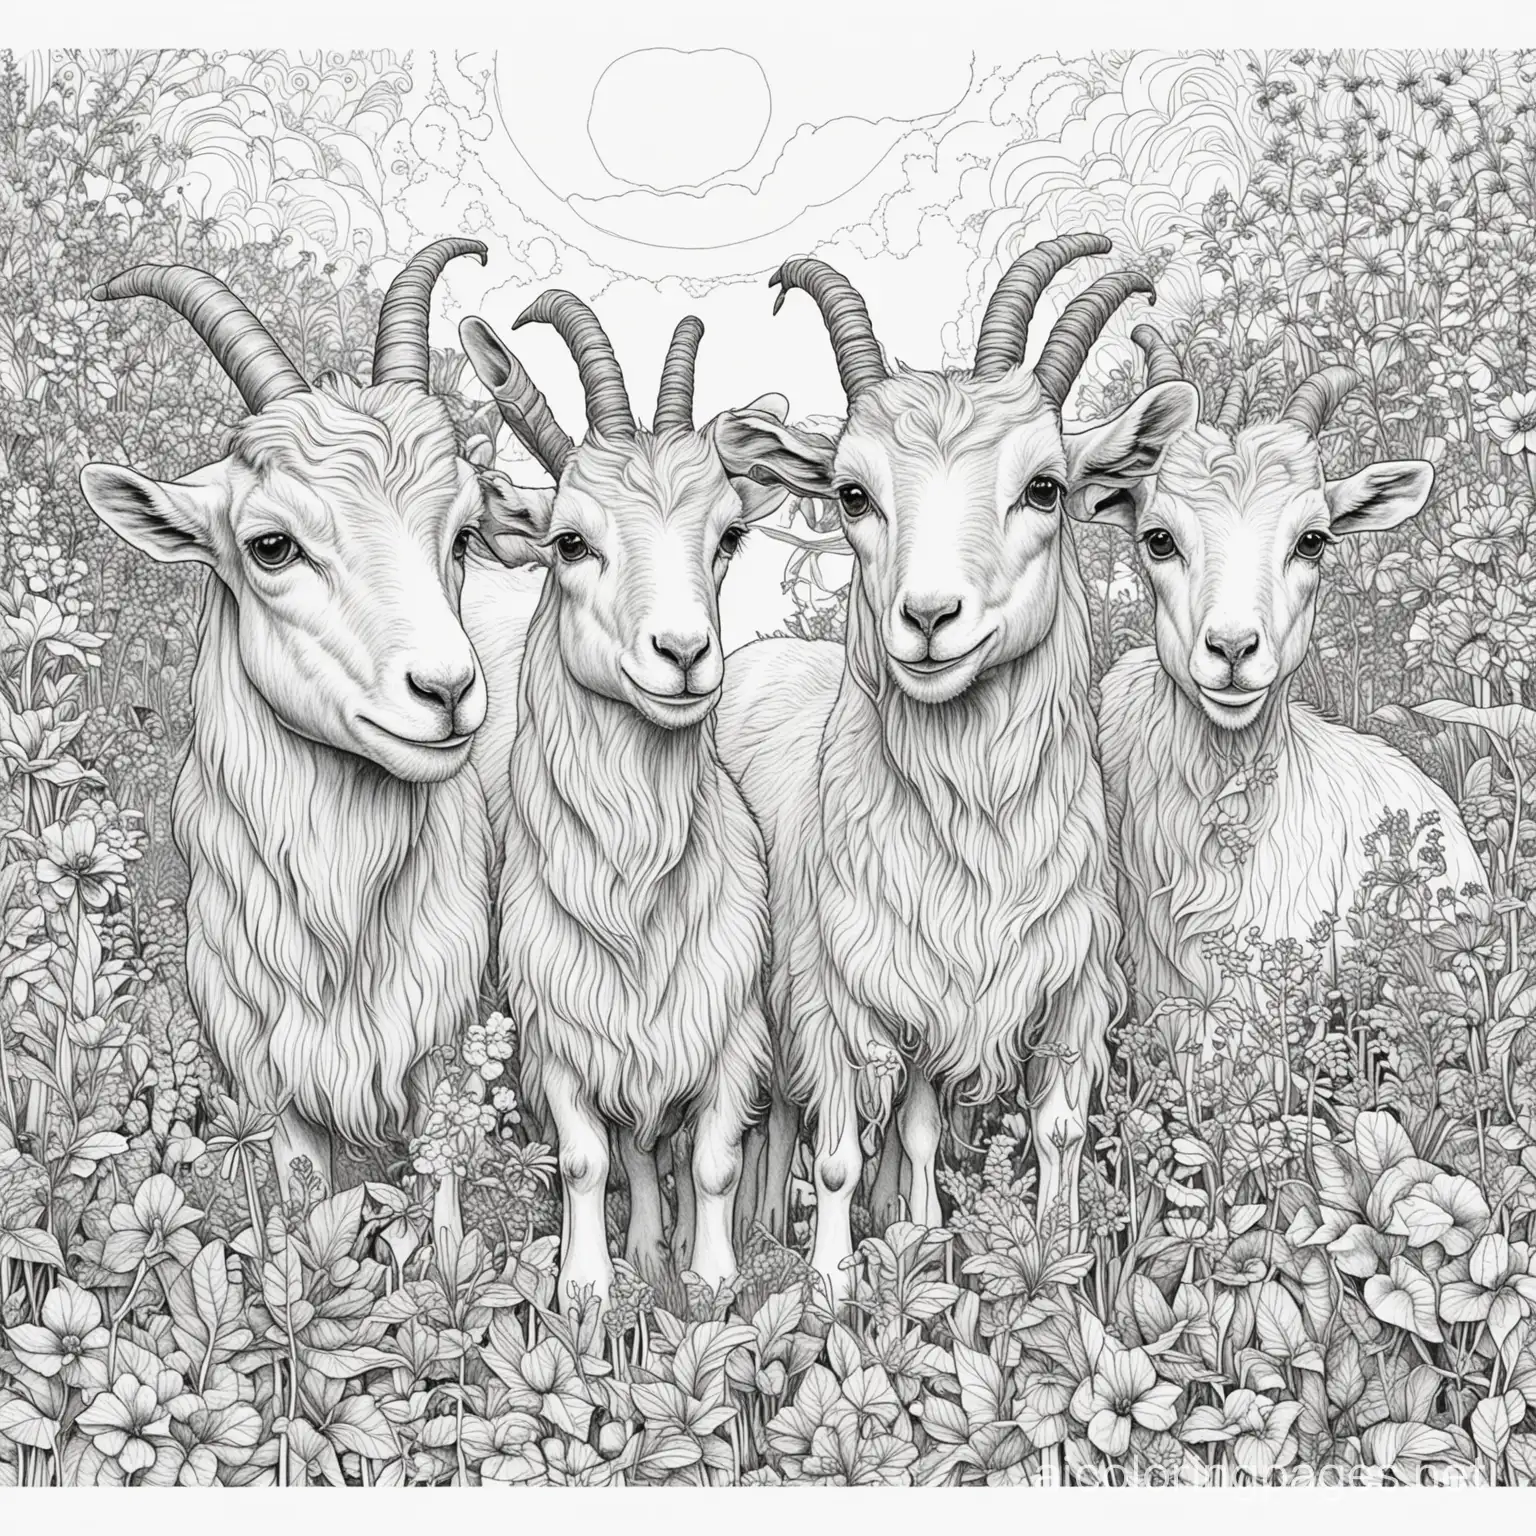 Psychedelic-Goats-Coloring-Page-Simple-Line-Art-on-White-Background